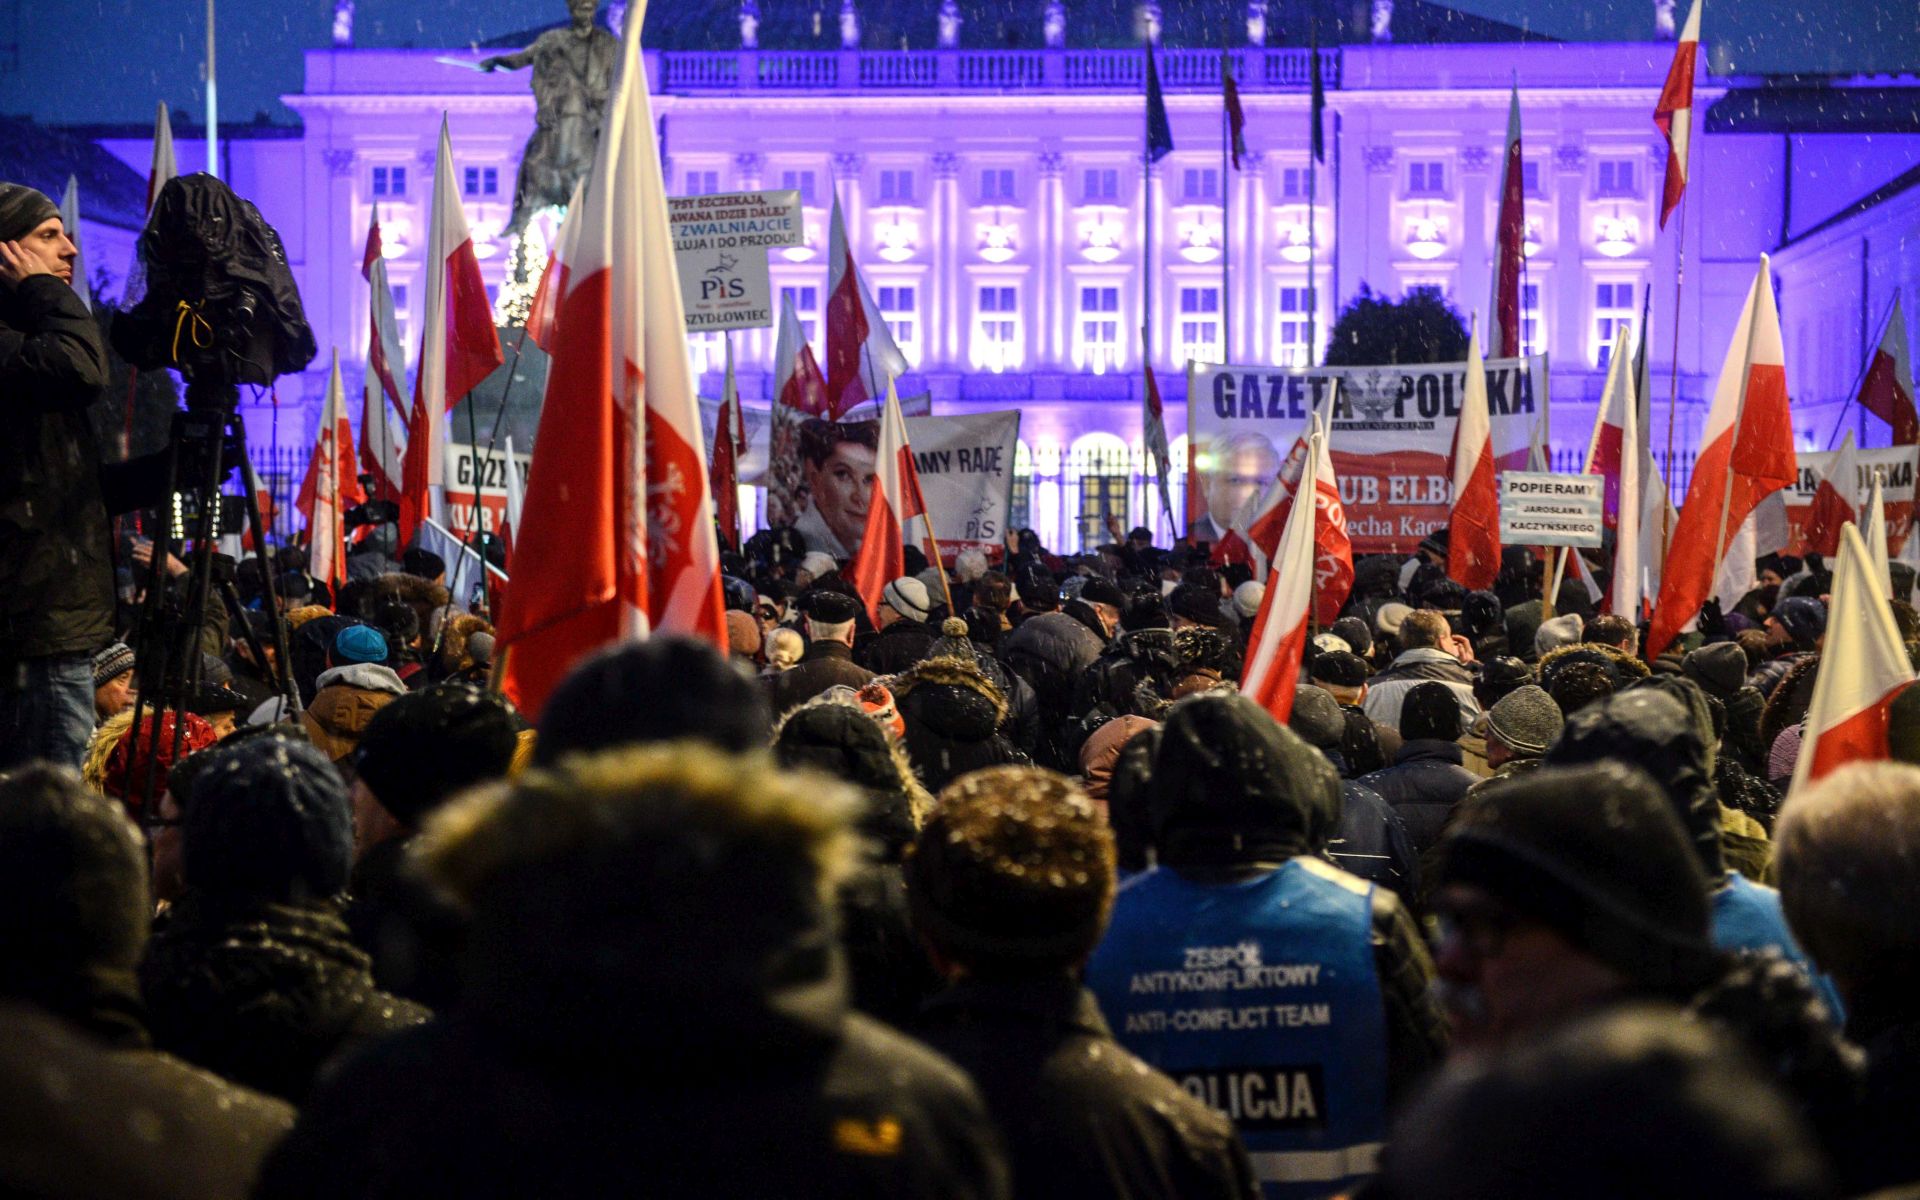 epa05681286 People take part in a demonstration in the defense of democracy organised by the Club of the Polish newspaper 'Gazeta Polska' in front of the Presidential Palace in Warsaw, 18 December 2016. The 'Gazeta Polska' organised demonstration, which is organised after a continous 3-day protest against the government, is a support action for the current government in Poland.  EPA/JAKUB KAMINSKI POLAND OUT